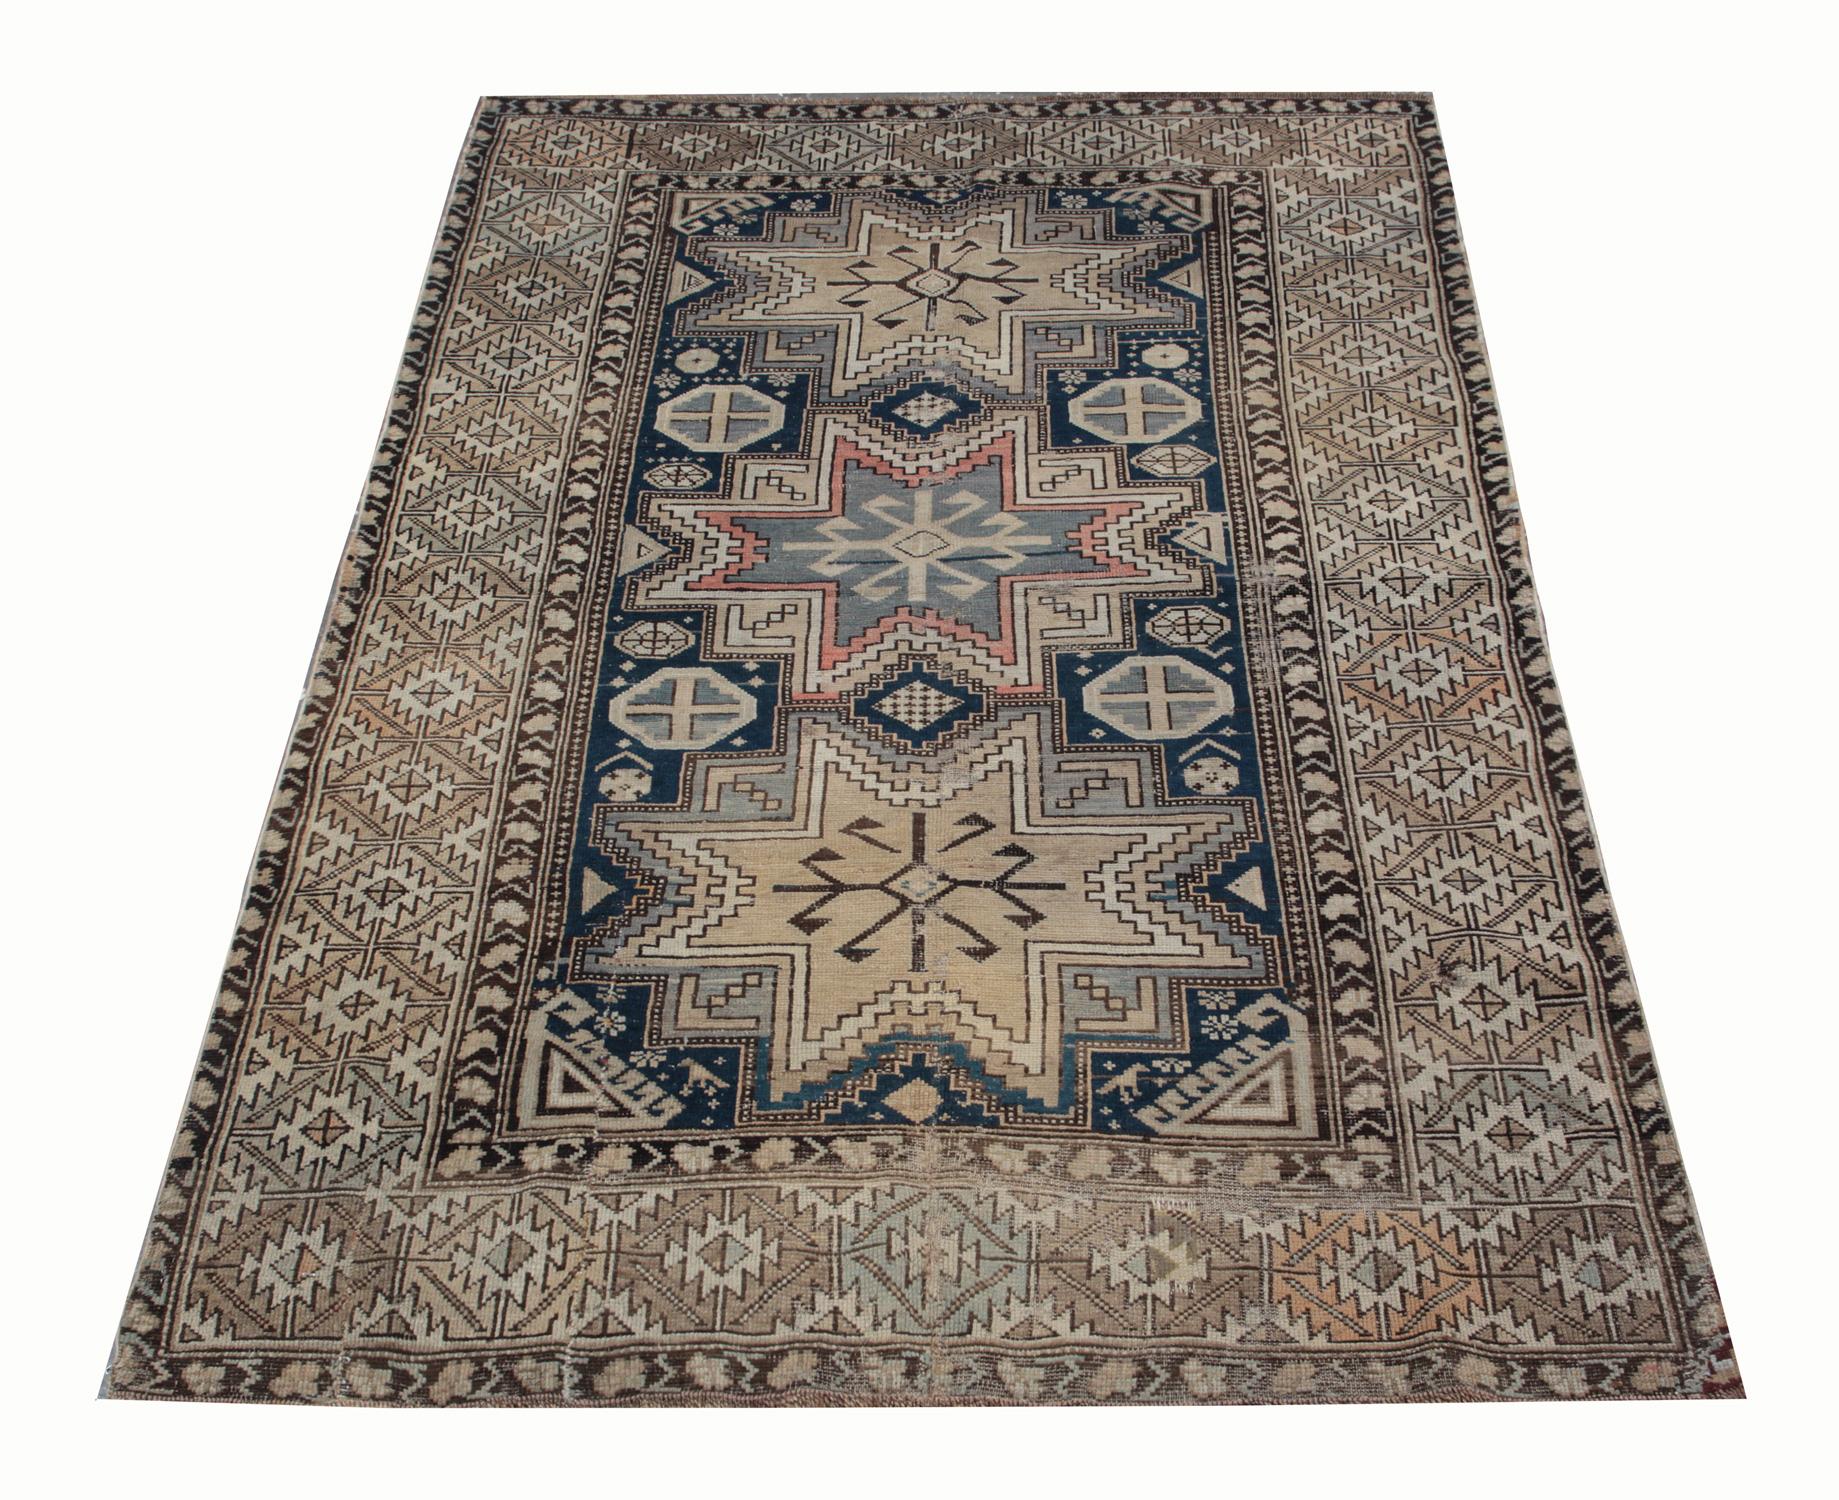 An excellent example of Caucasian carpet rug weaving from the Kazak region. Though these orange- red ground Central Medallion patterned rugs may seem like from a distance, but this woven rug has a great range of colors. This geometric rug has a